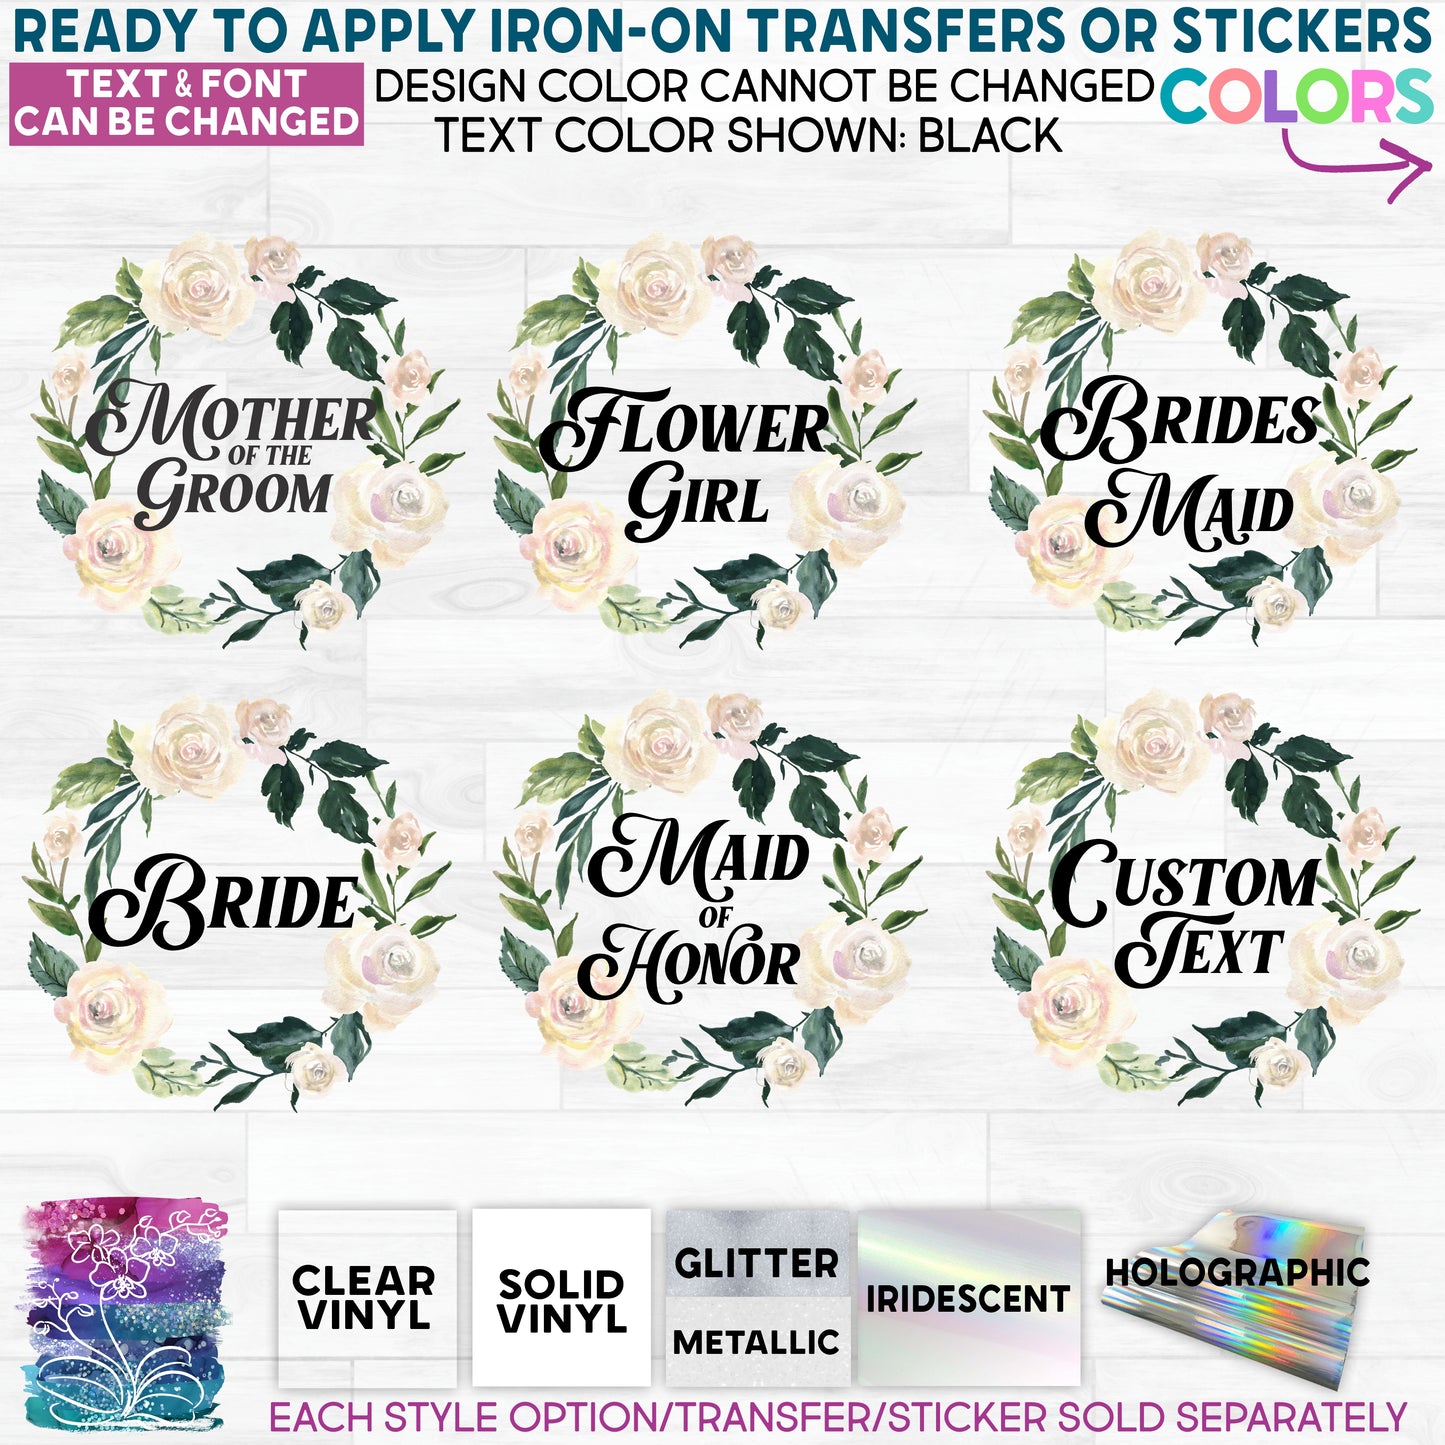 (s212-B) Bridal Wedding Party White Rose Floral Flowers Watercolor Glitter or Vinyl Iron-On Transfer or Sticker